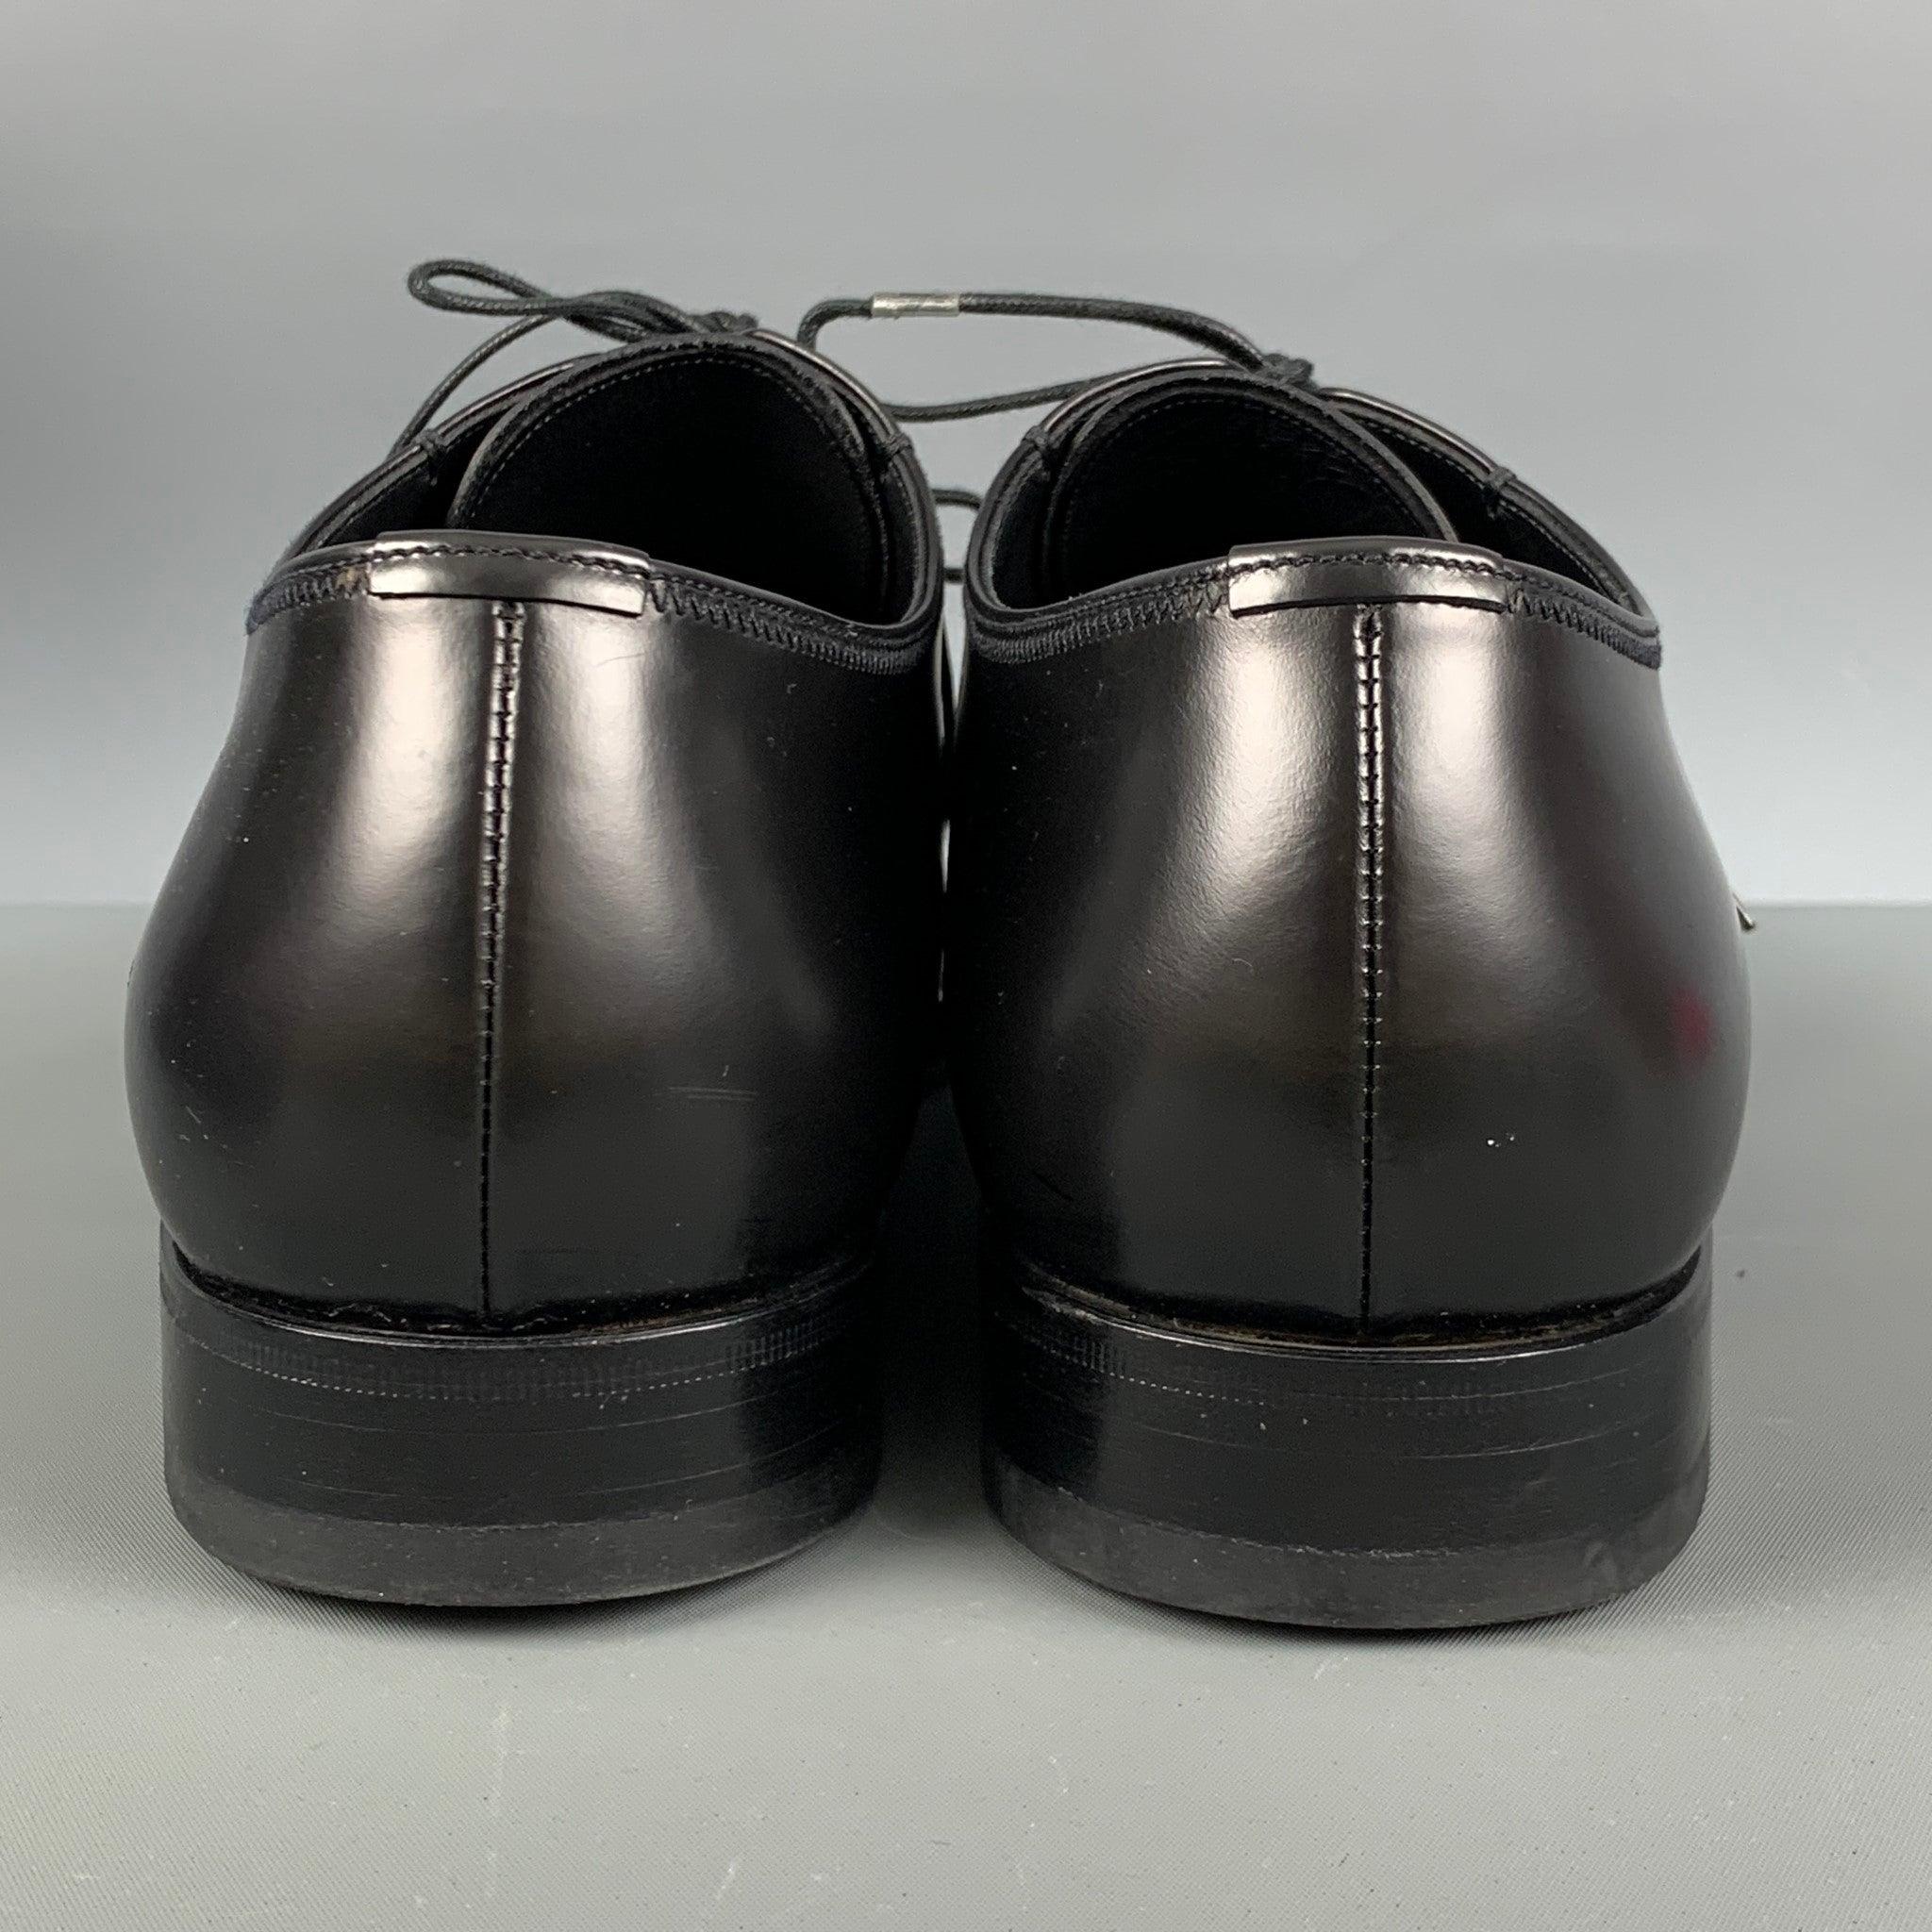 PRADA Size 10.5 Black Leather Square Toe Lace Up Shoes In Excellent Condition For Sale In San Francisco, CA